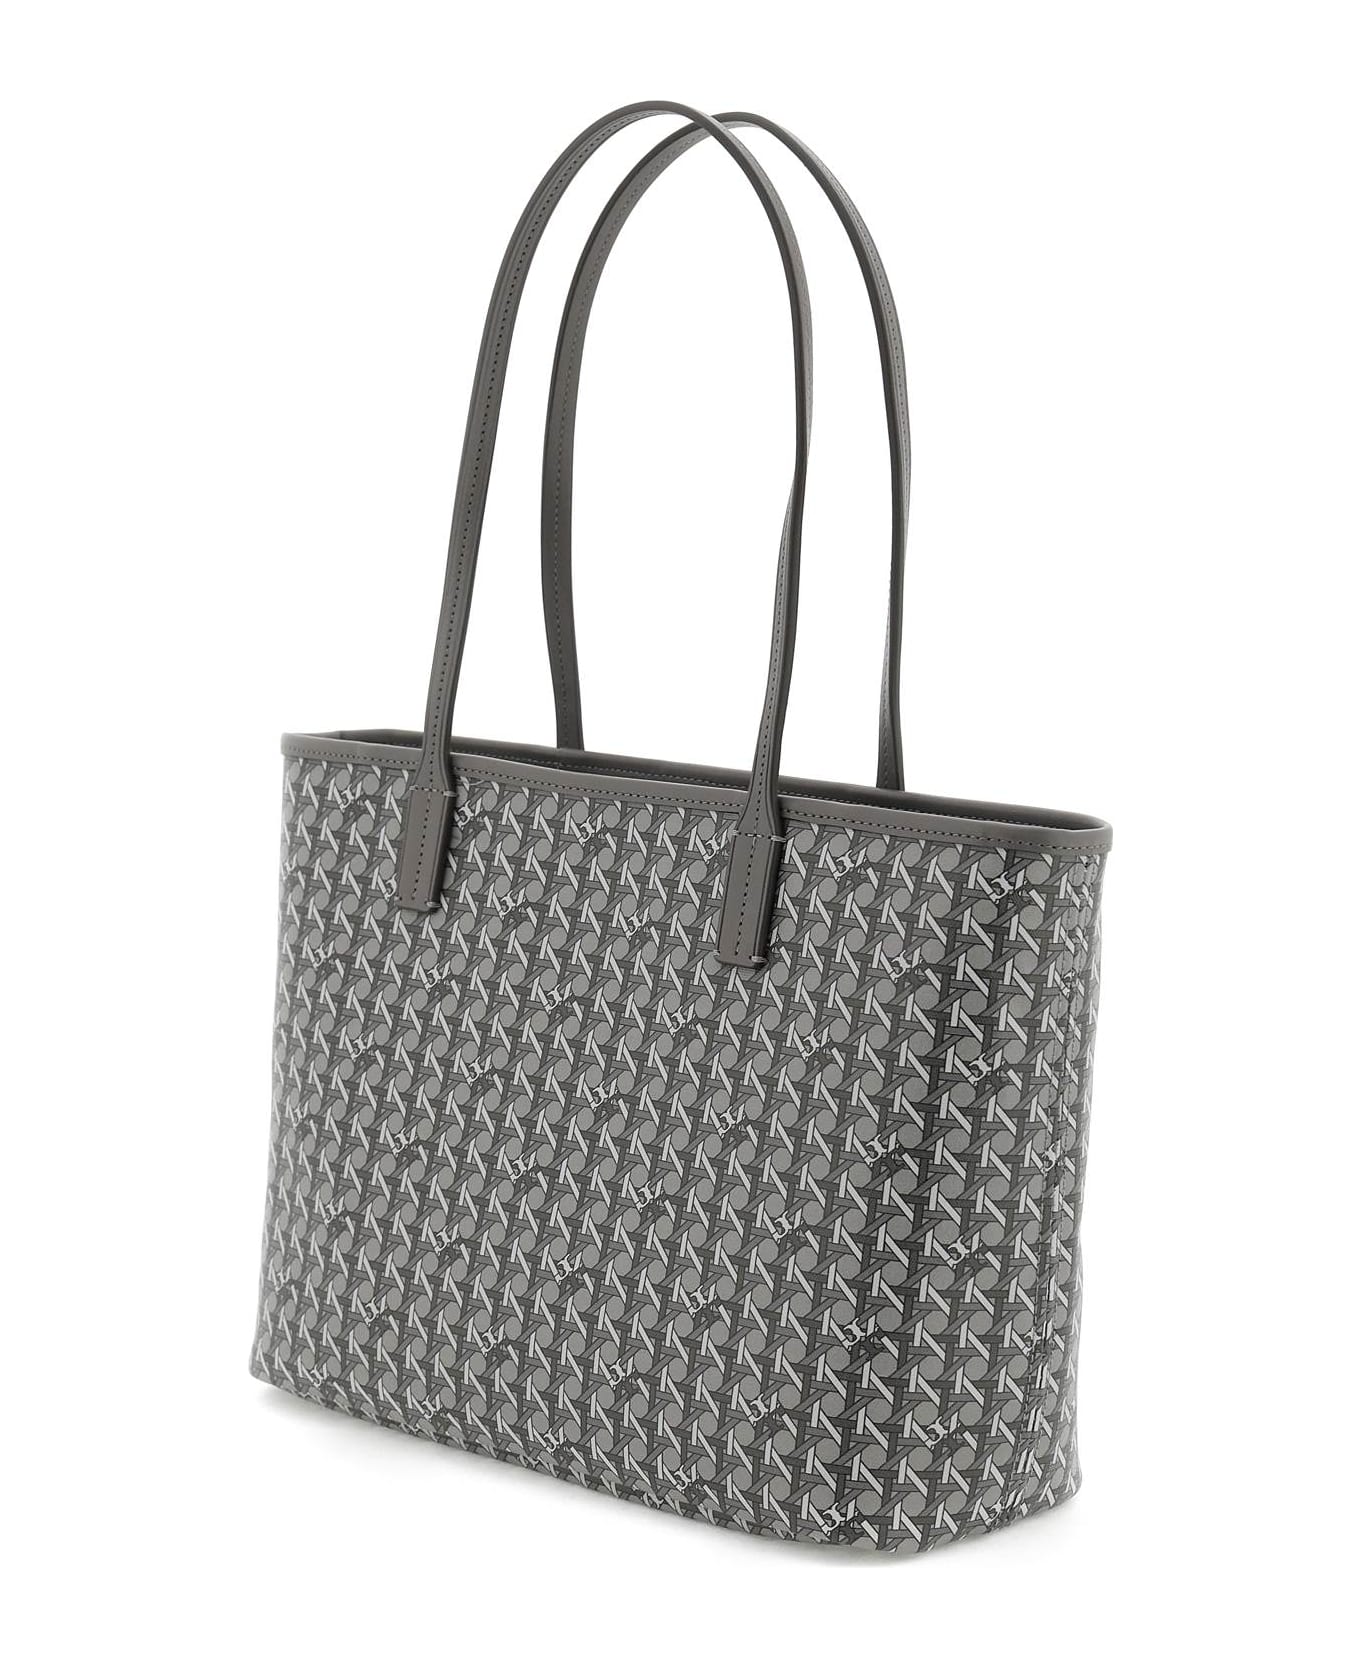 Tory Burch Ever-ready Small Tote - ZINC (Grey)